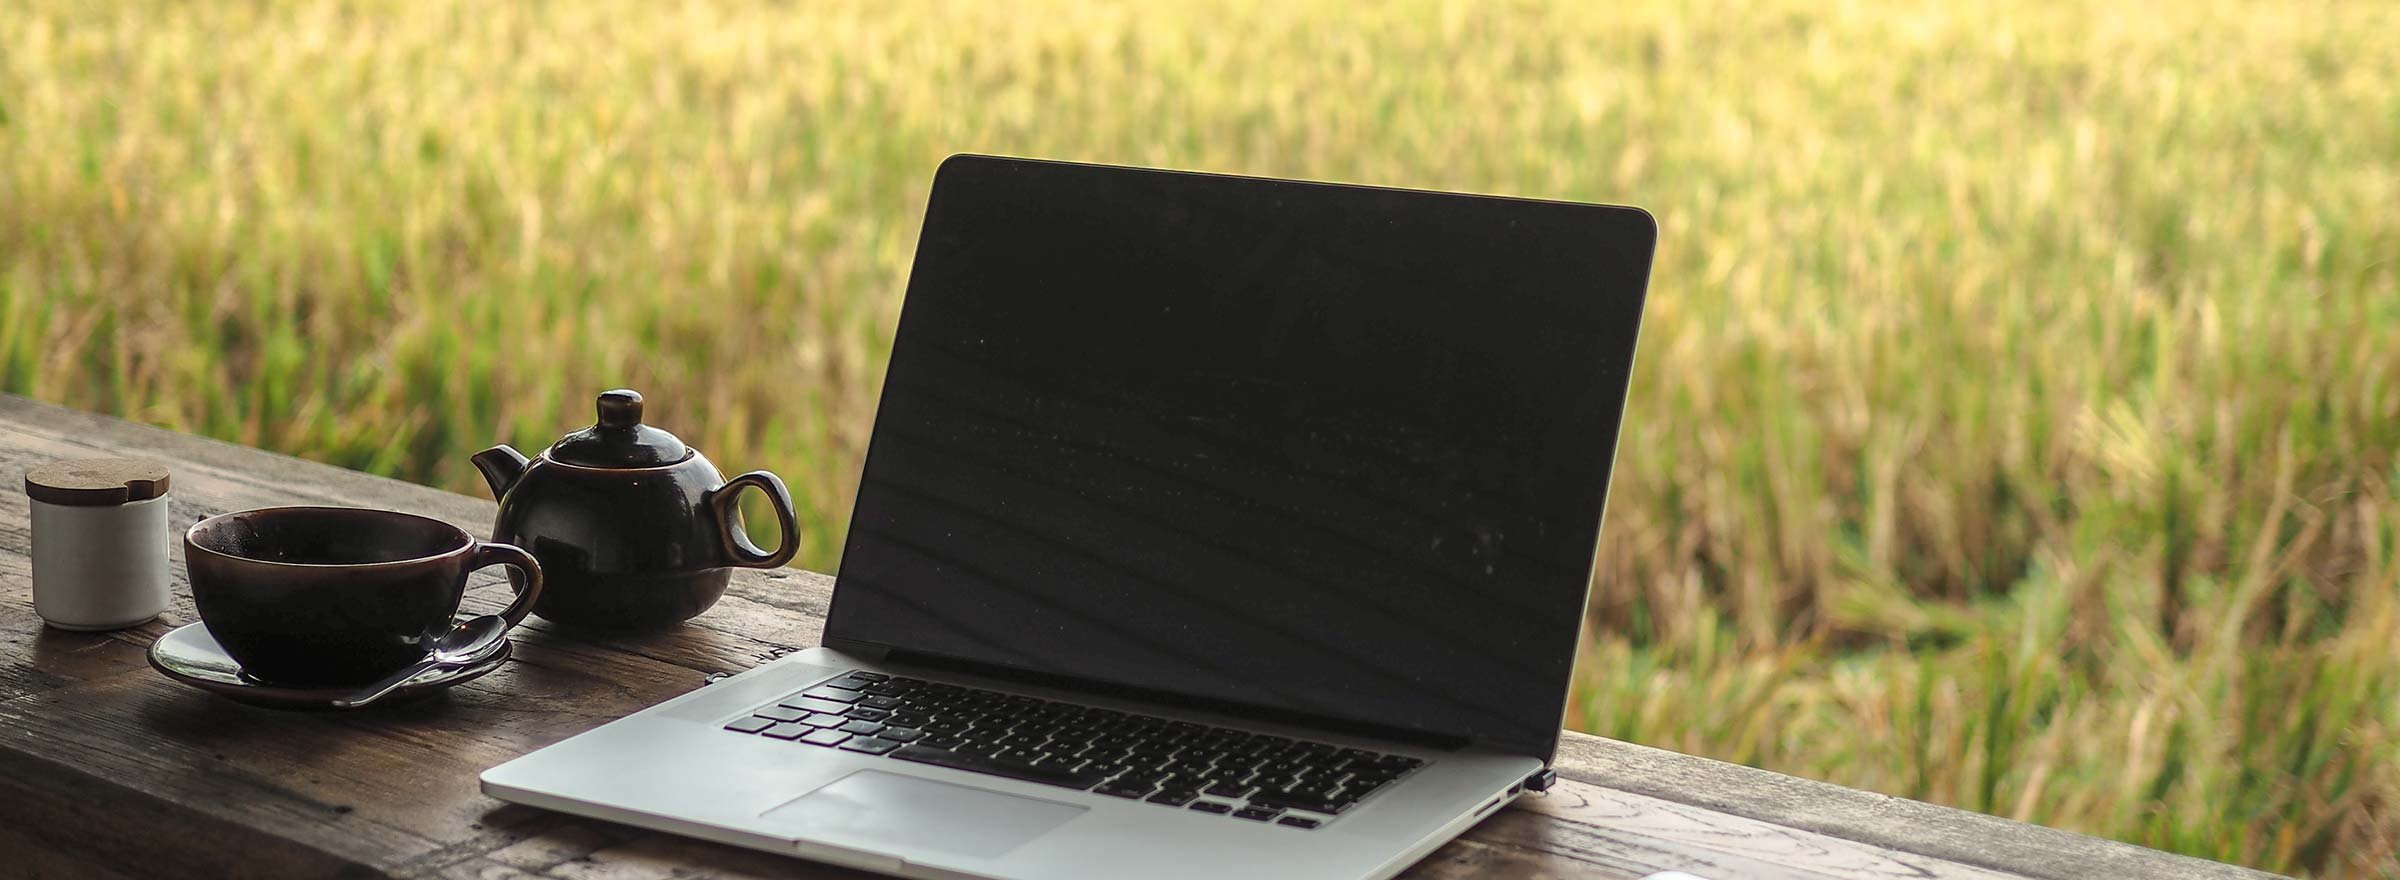 laptop on an outdoor table with a teapot and cup